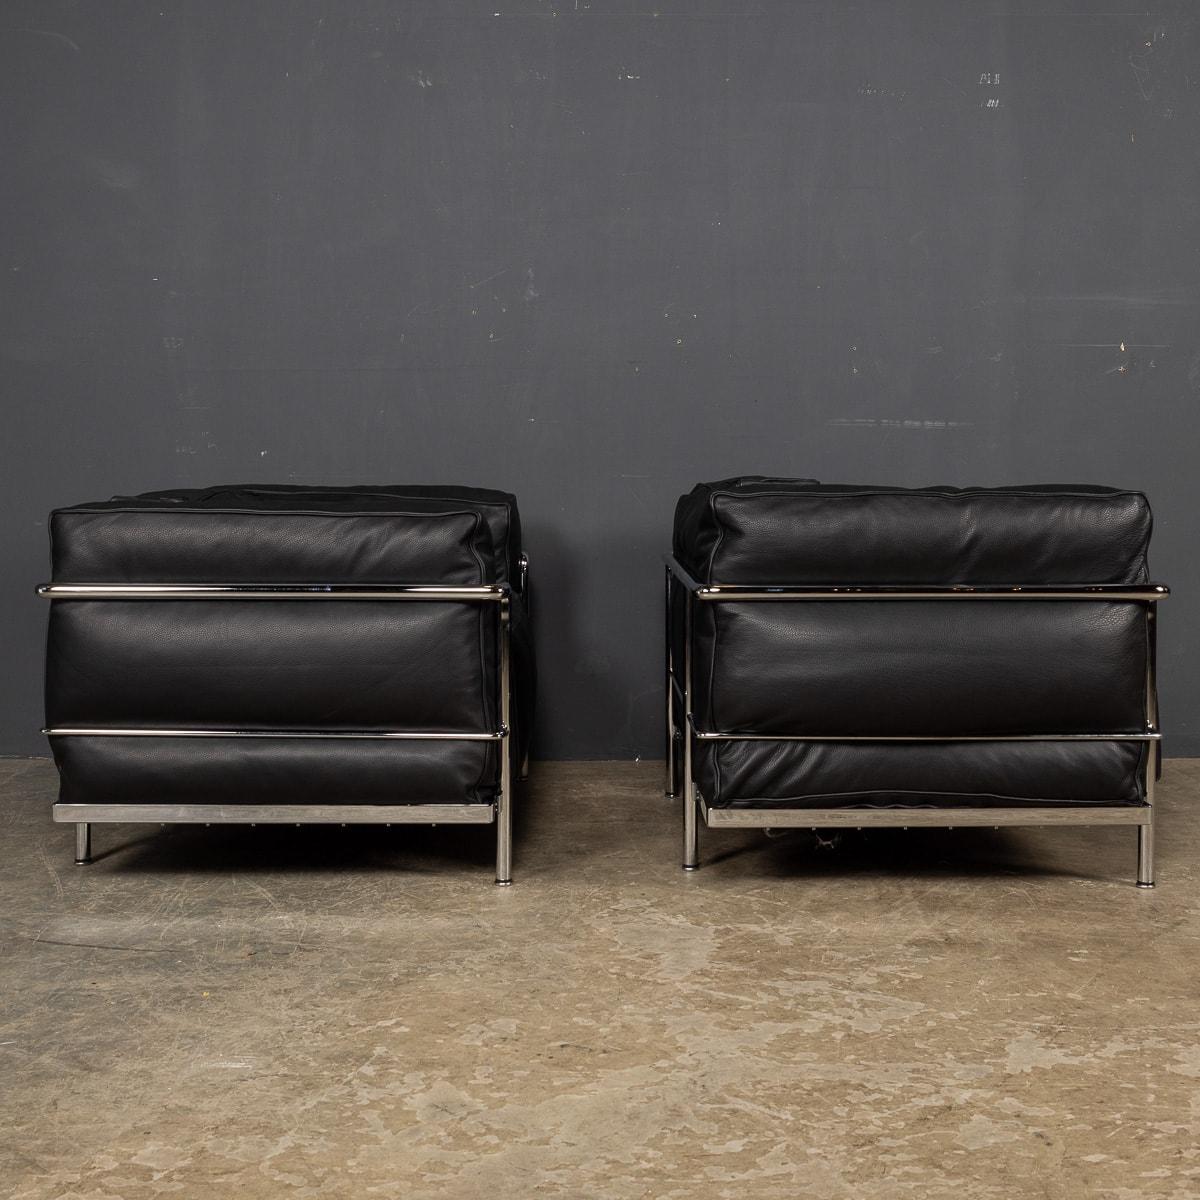 French 3 Fauteuil Grand Confort, Grand Modele, Durable Cassina Armchairs. Le Corbusier For Sale